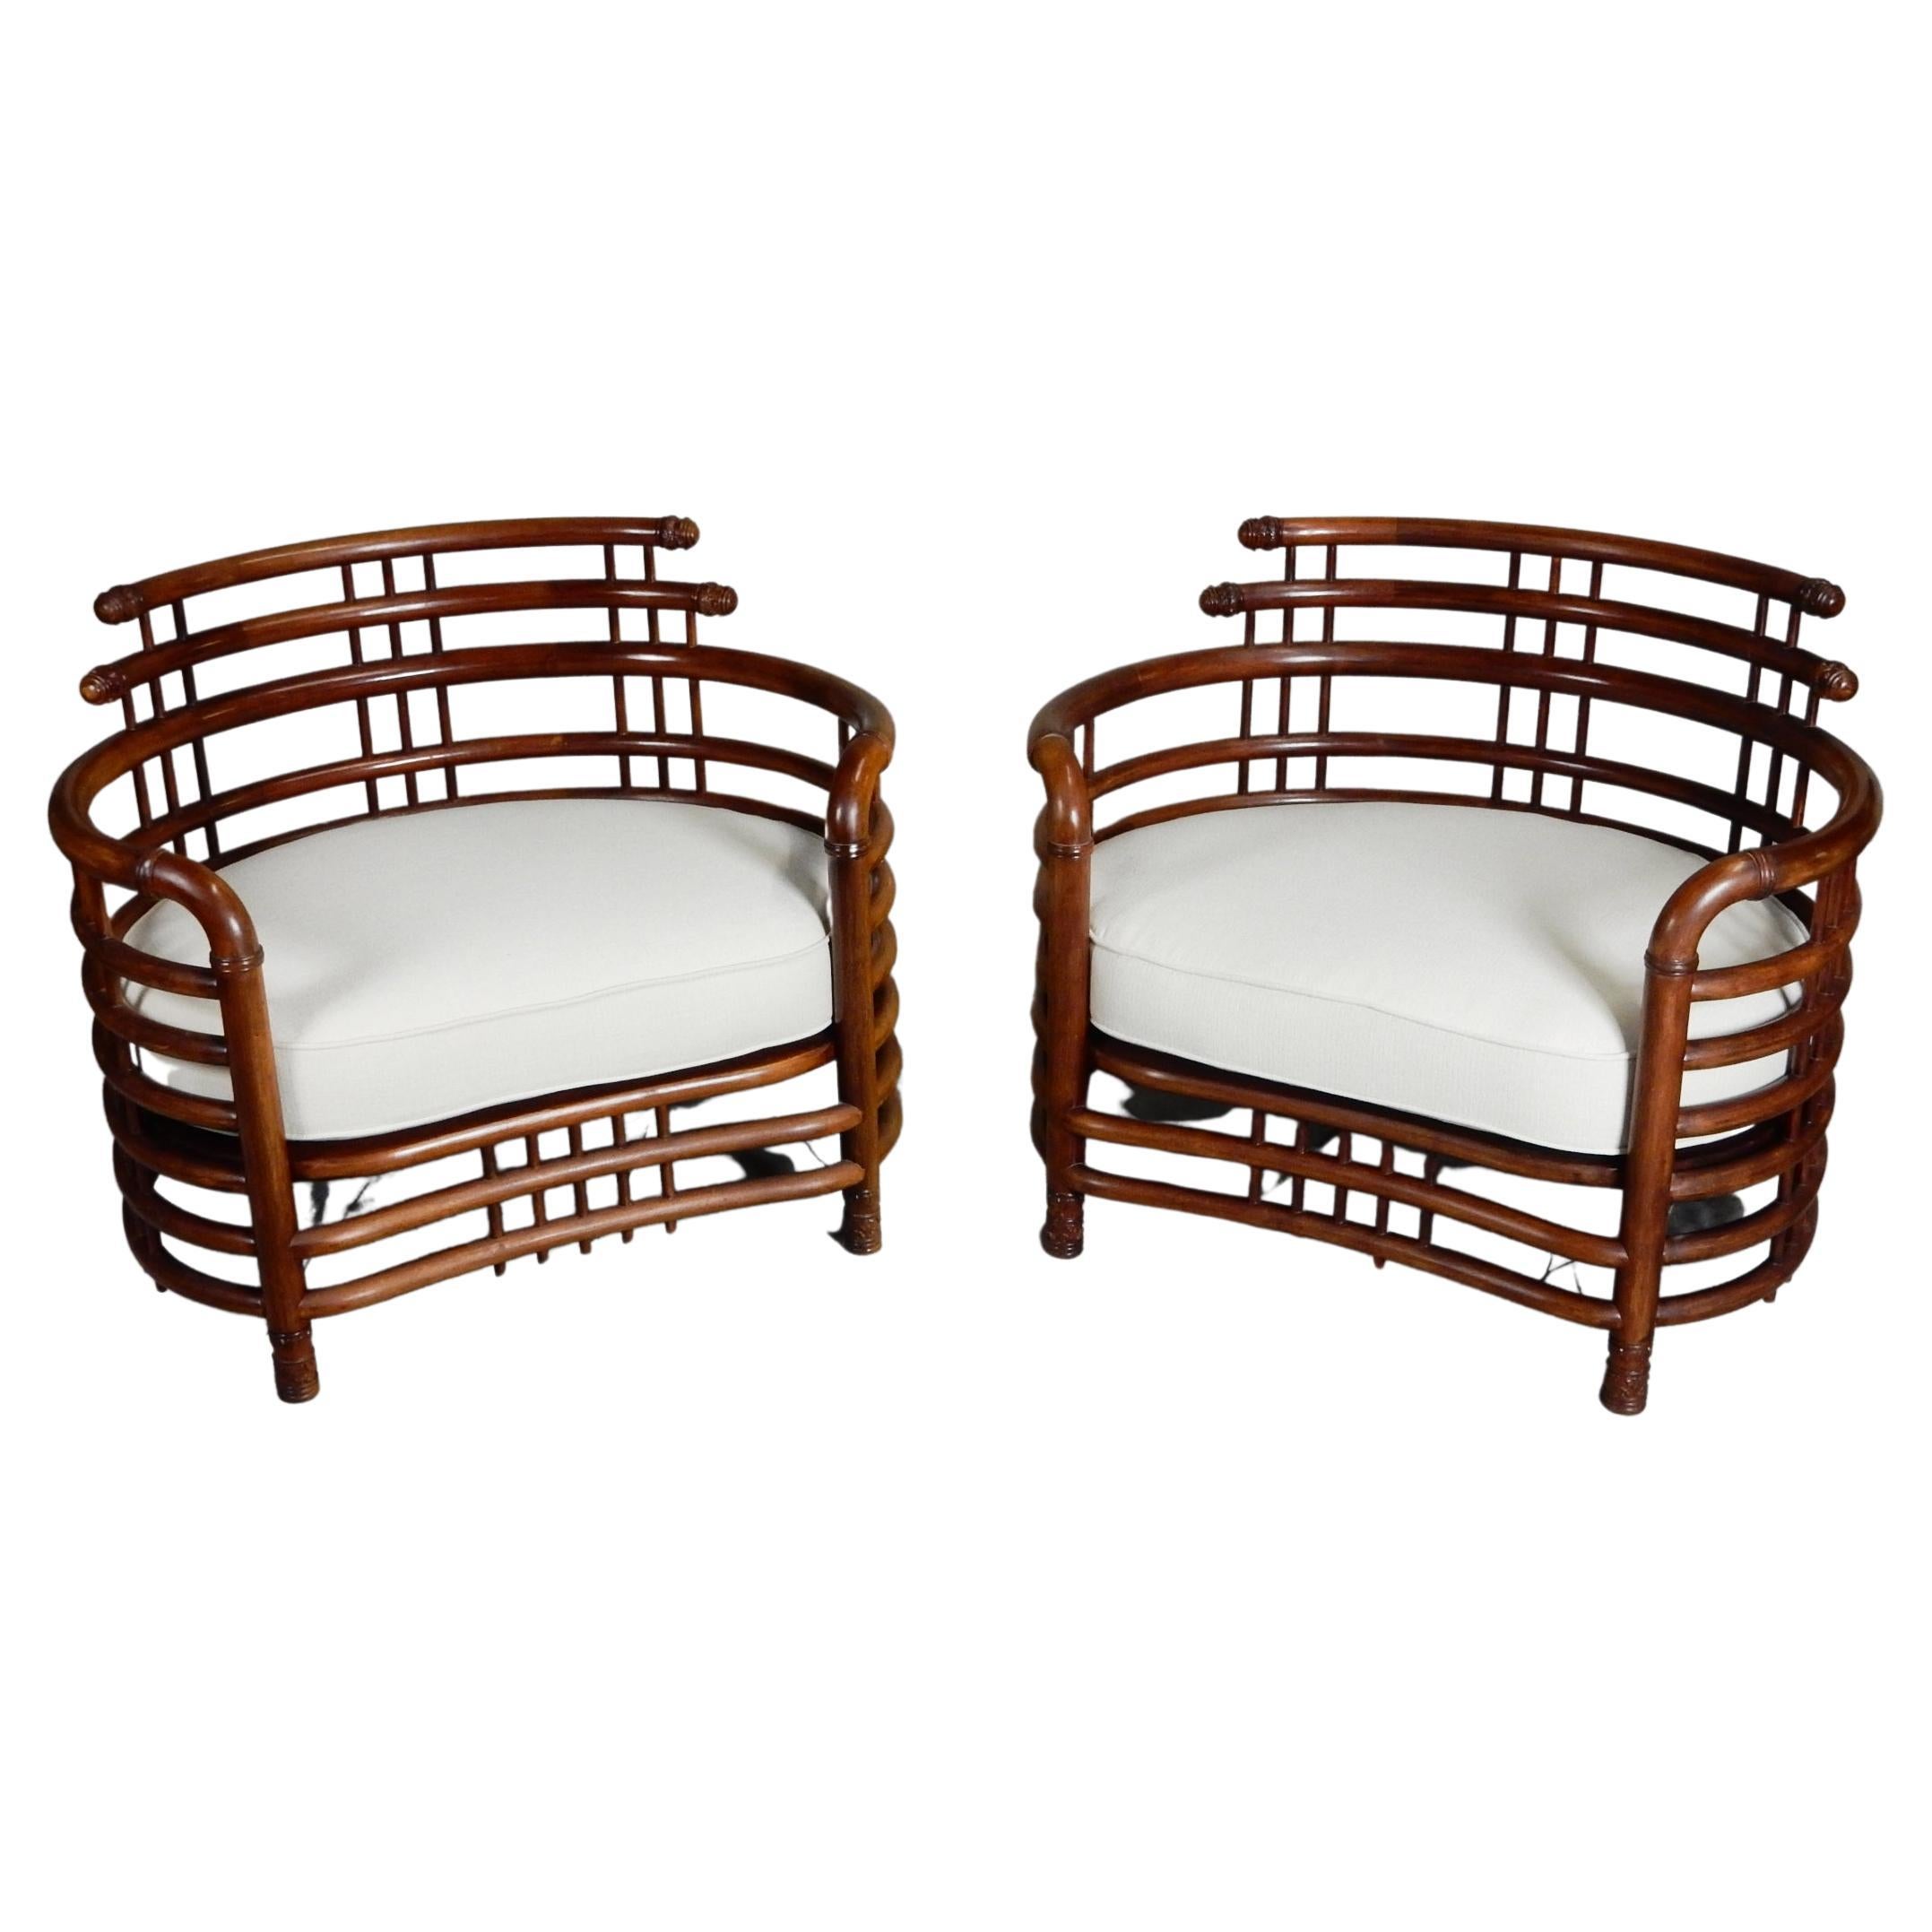 1950's, Sculpted Bentwood Teak Birdcage Lounge Chairs 2